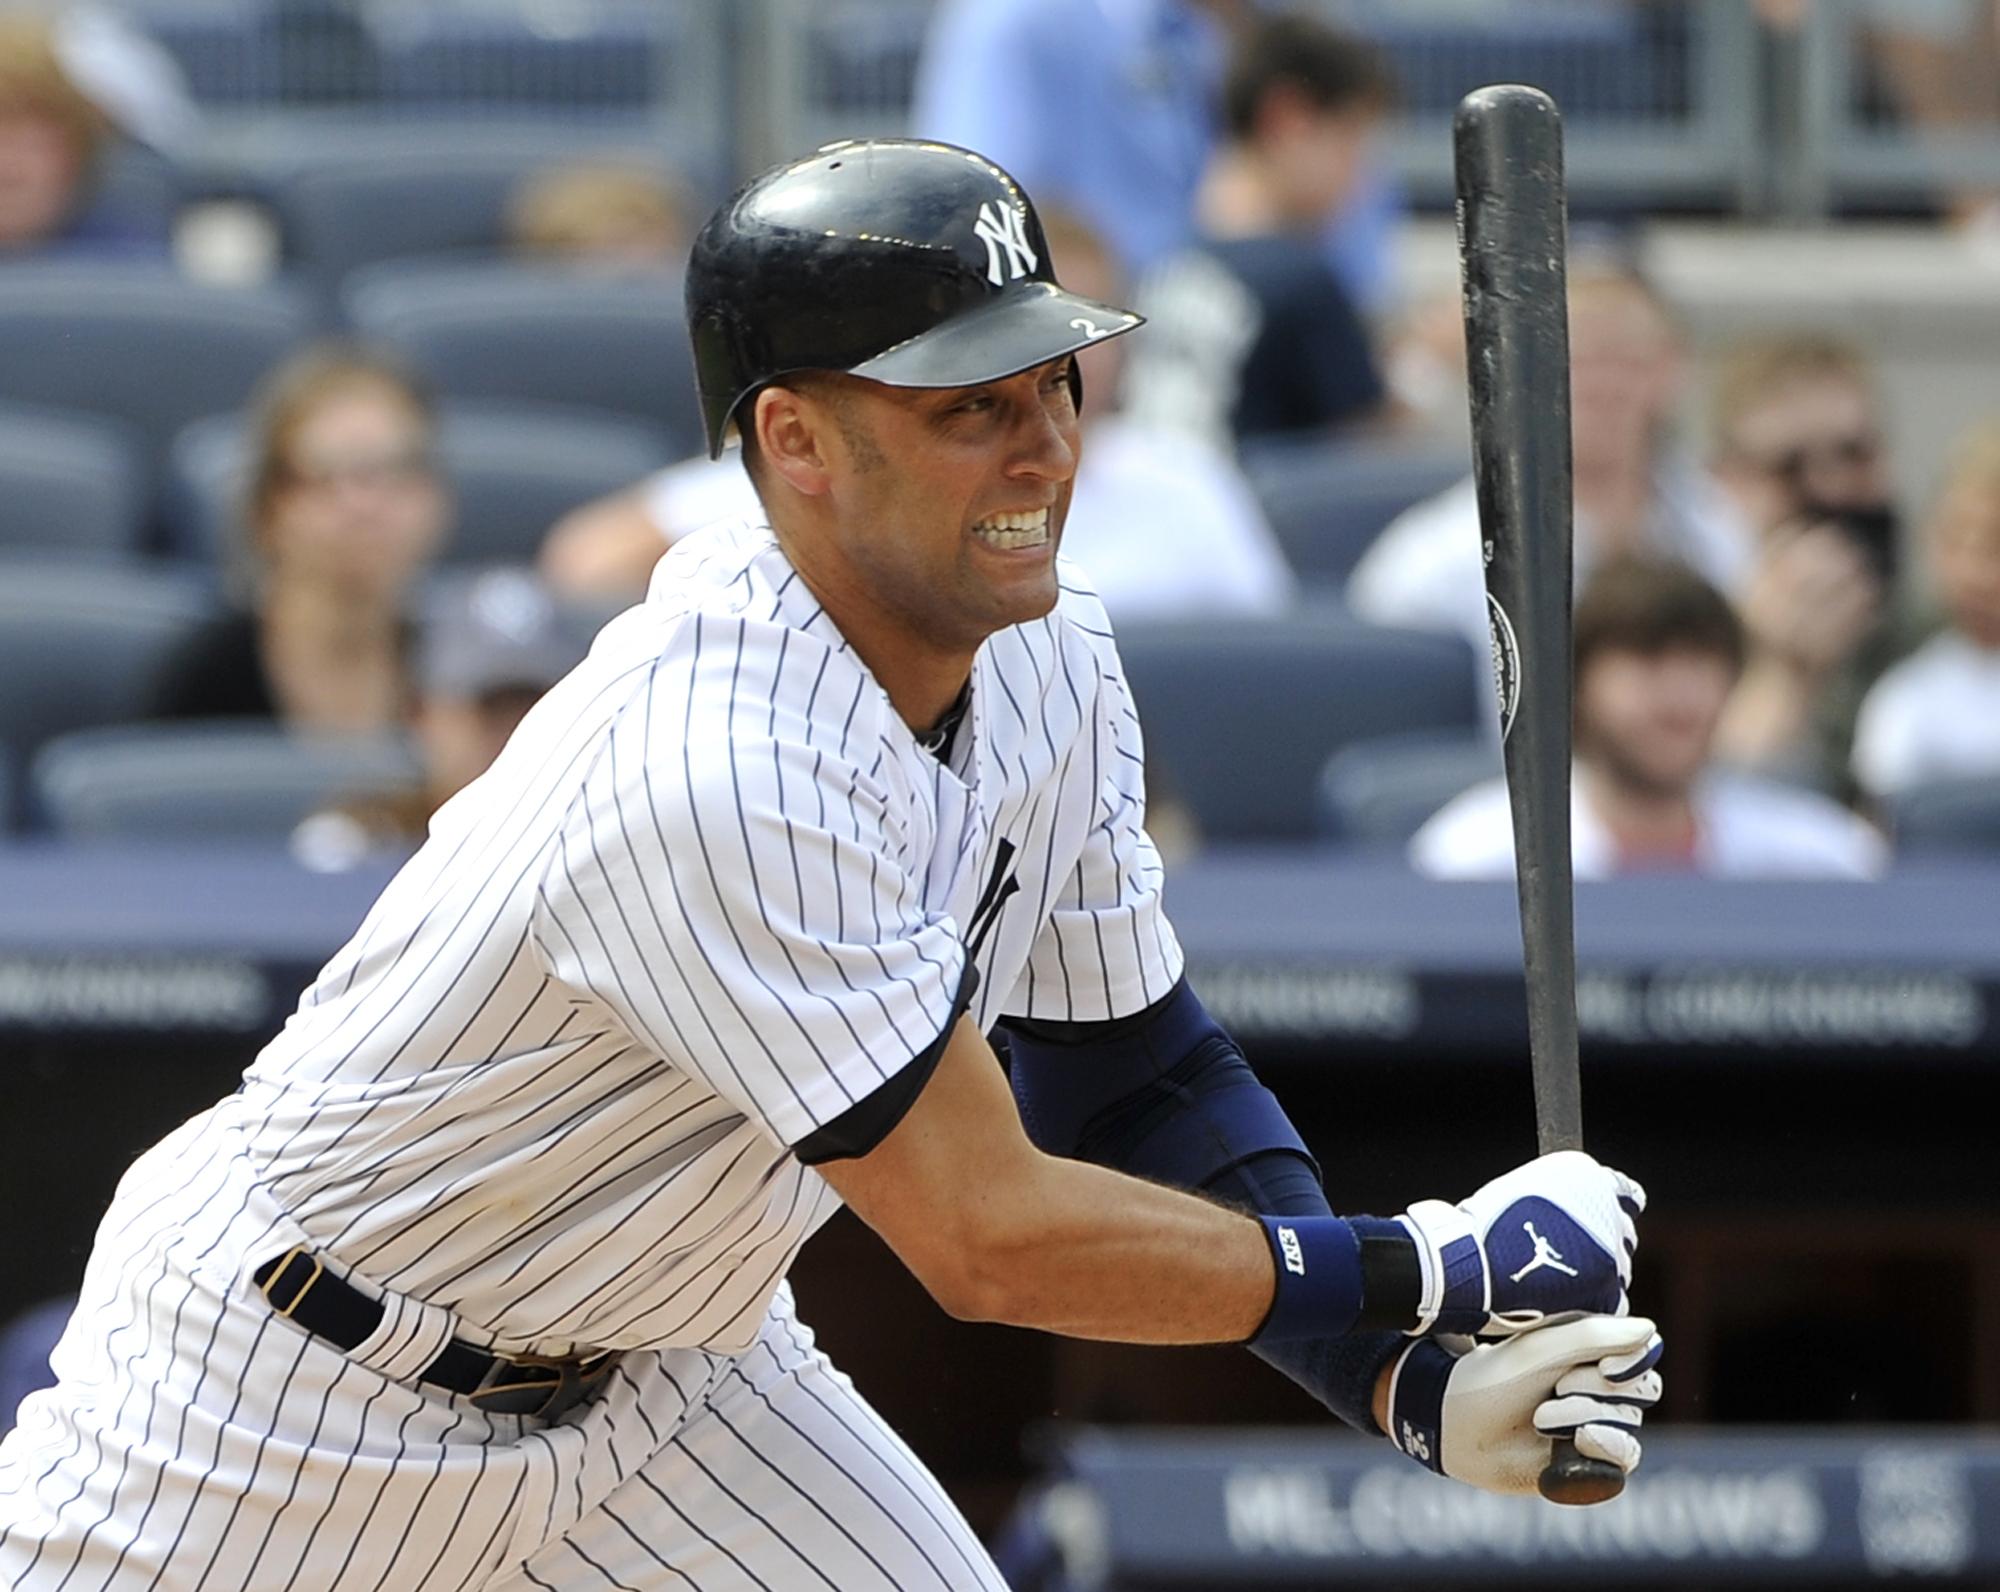 Yankees place Jeter on DL